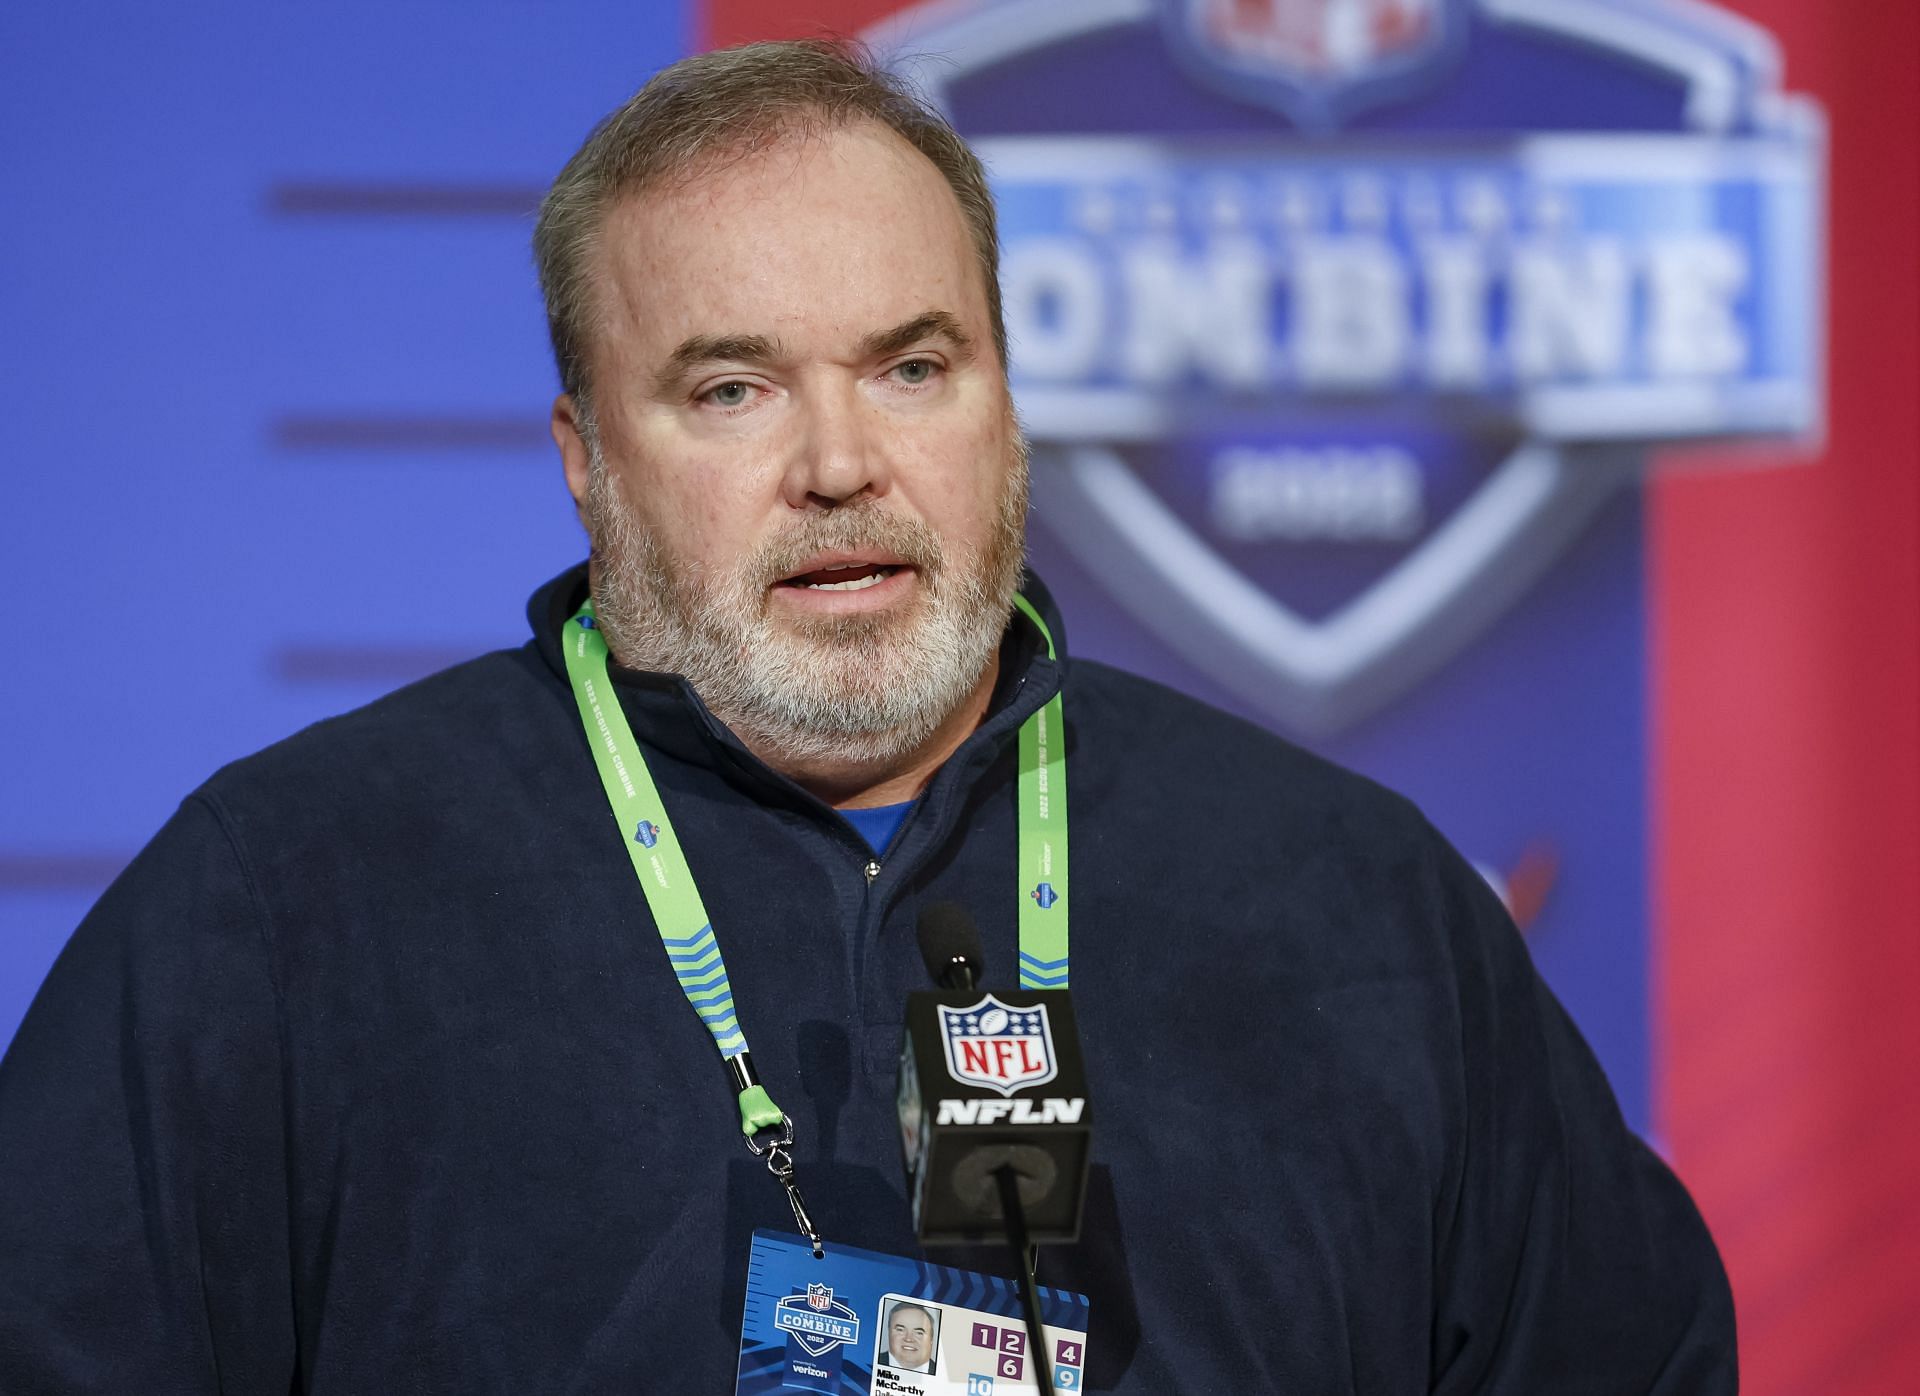 Dallas Cowboys head coach Mike McCarthy speaking at the NFL Combine